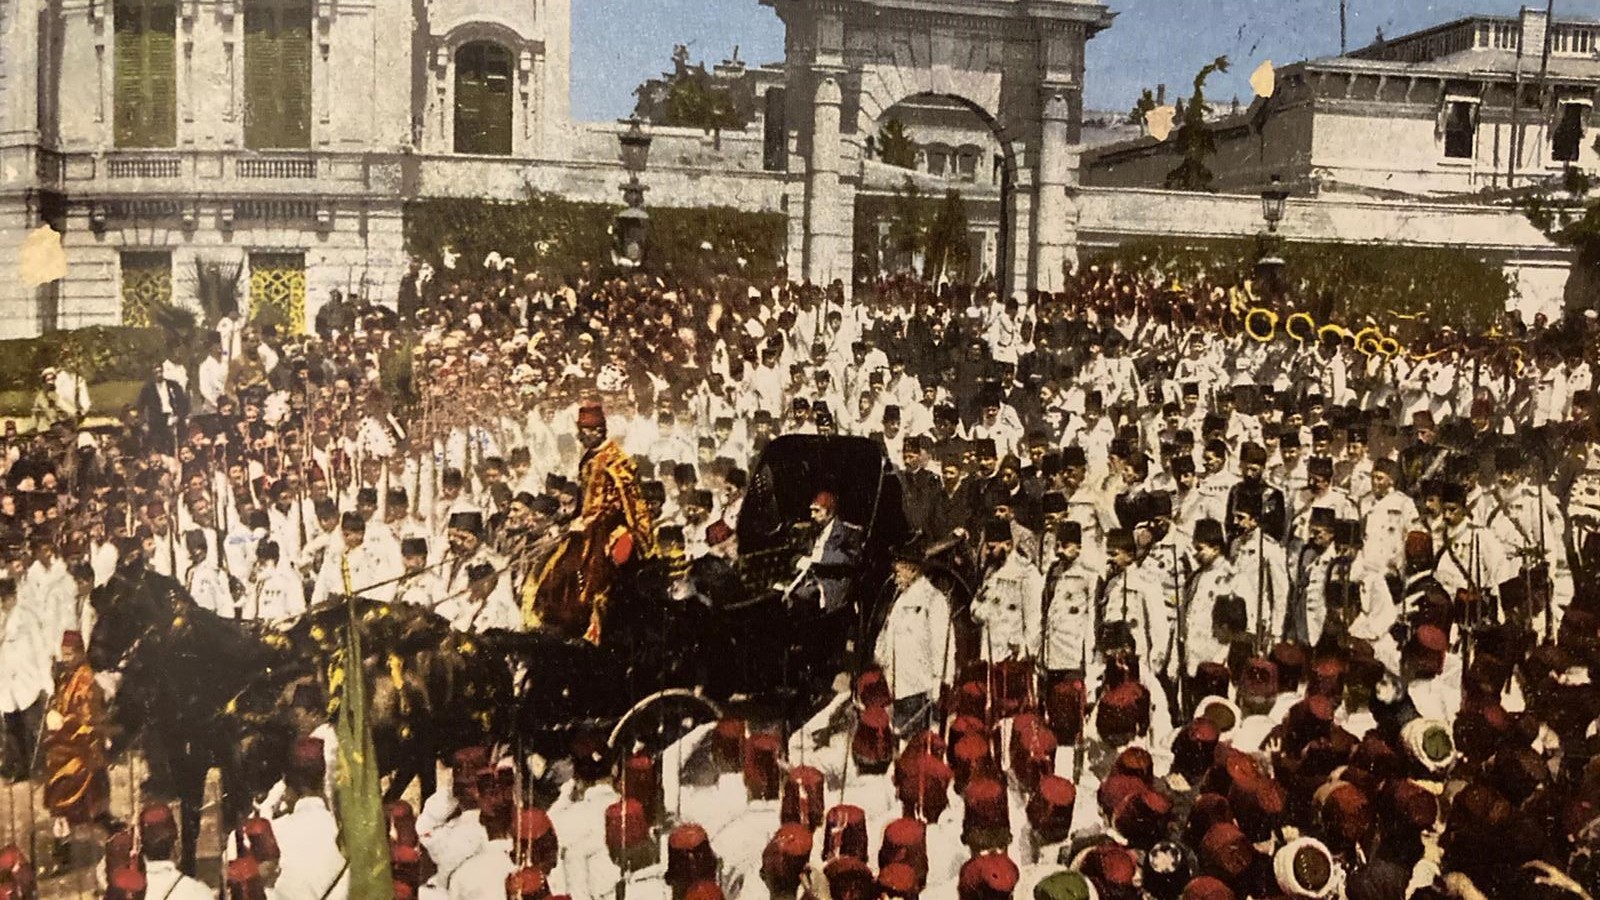 A colourised image of Ottoman Sultan Abdulhamid II (pictured on the backseat of the carriage) arriving for Friday prayers at the Yildiz mosque (Public archive)